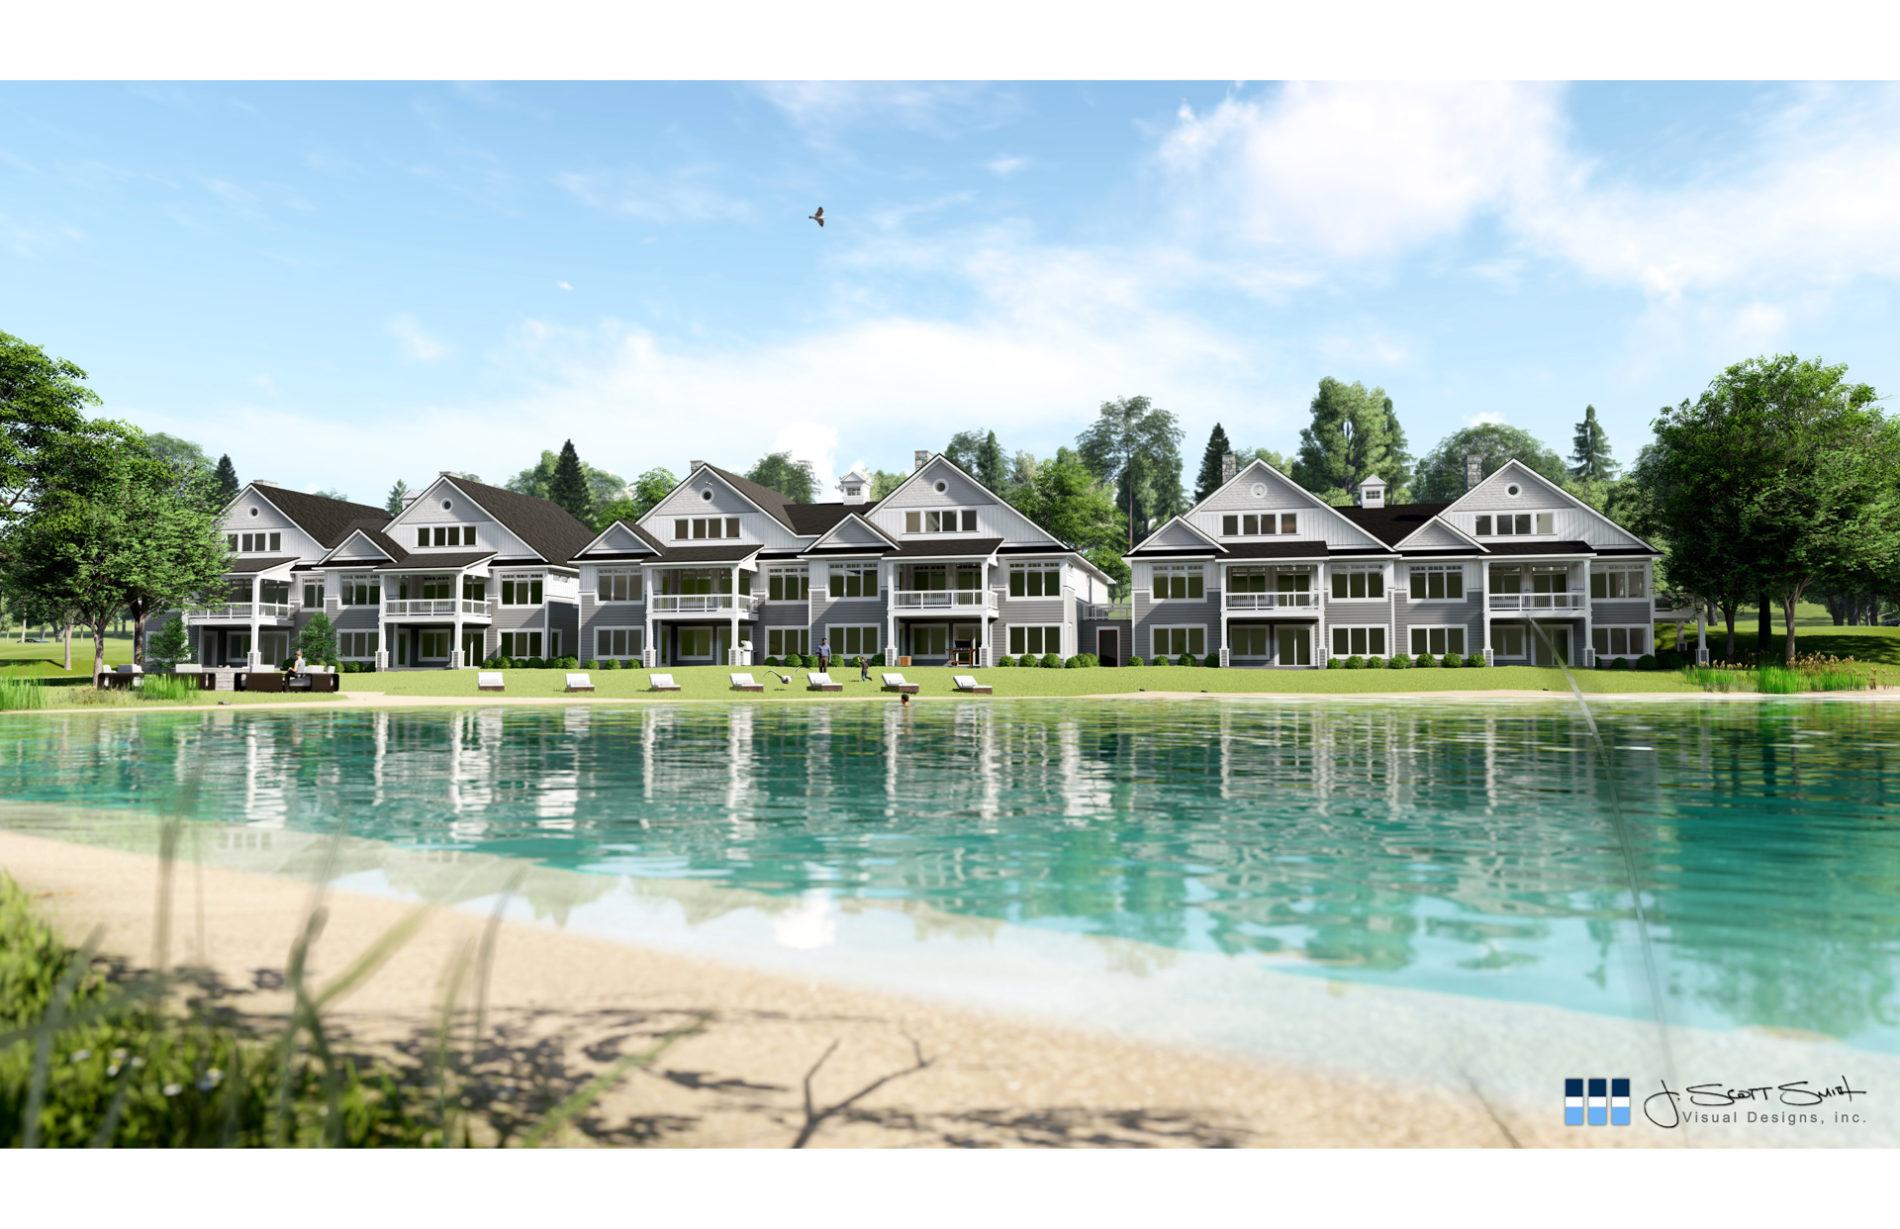 Architectural rendering of condos apartments townhomes 3D design model